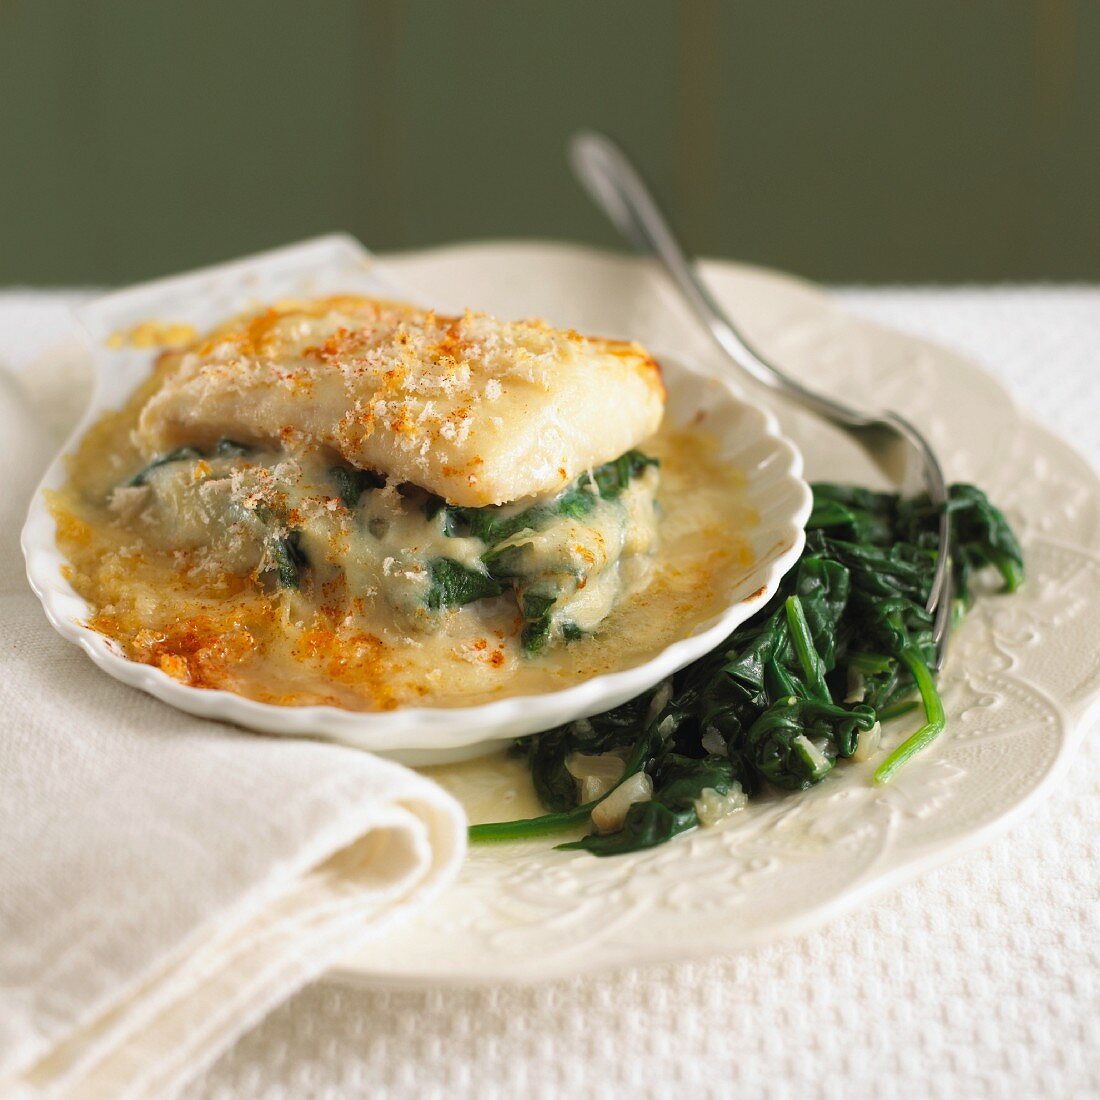 Haddock baked with cheese, served with spinach